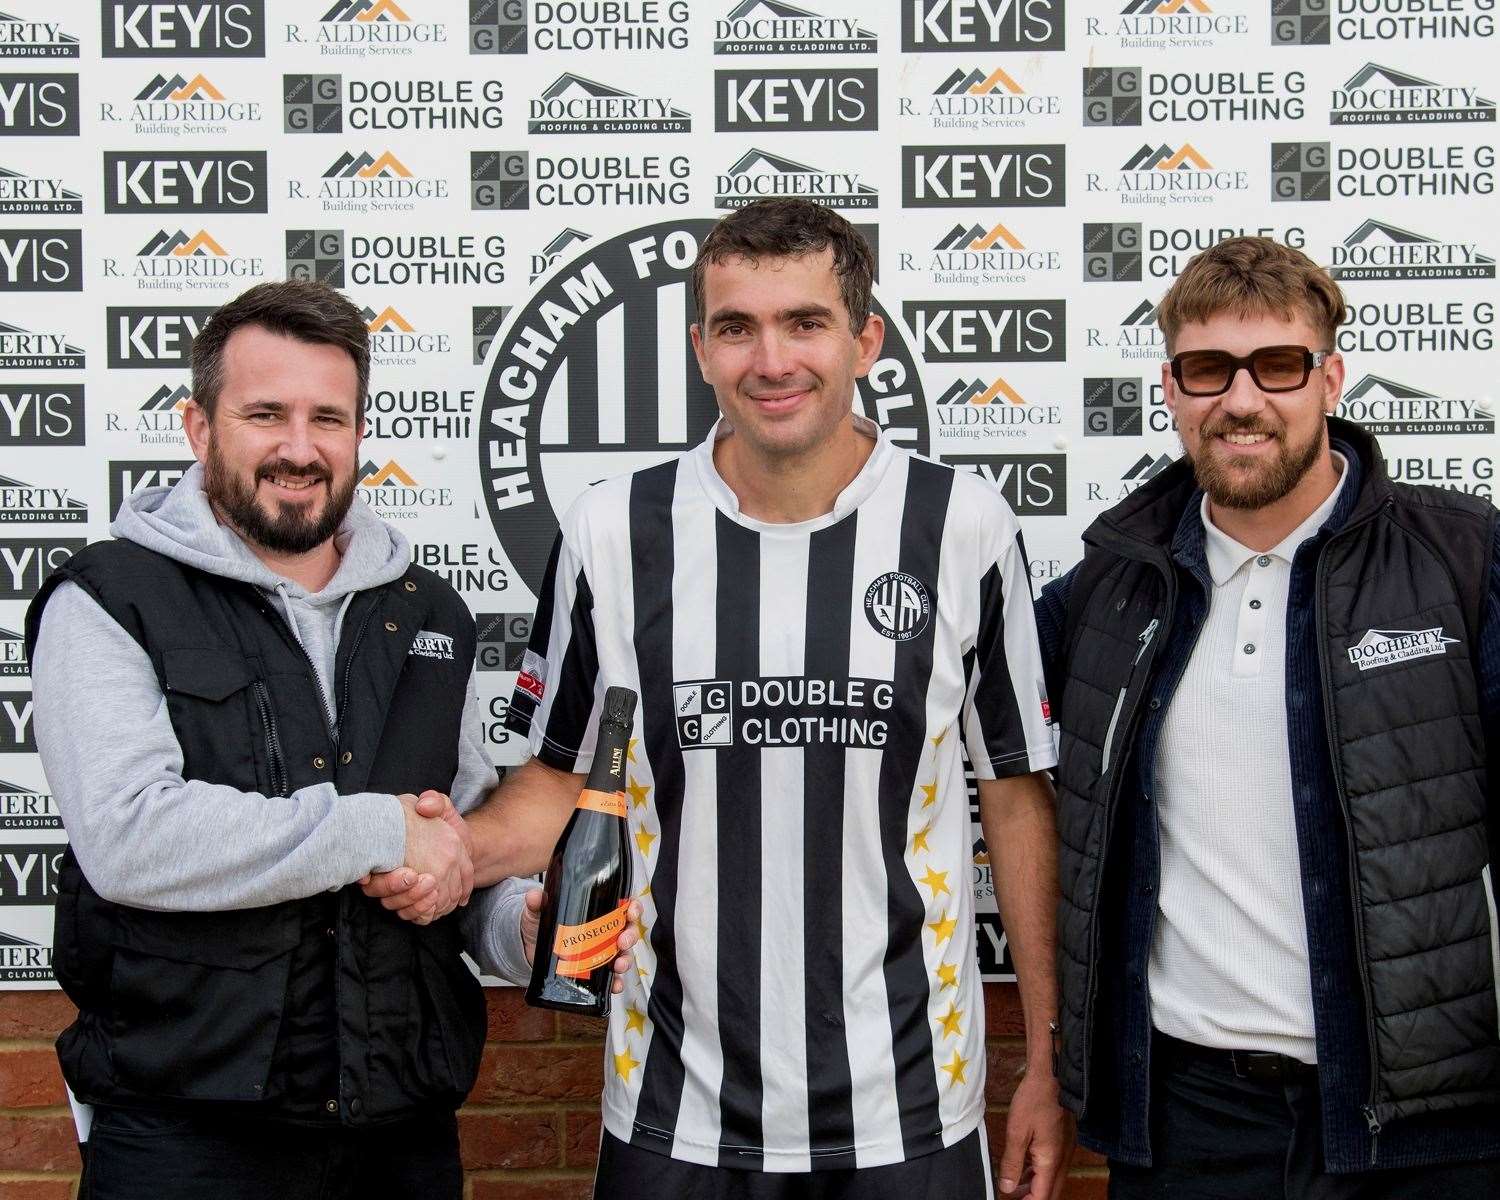 Docherty Roofing and Cladding sponsored yesterday's game in the FA Vase. Lyndon Docherty, along with his colleague Ryan Skipper, are pictured presenting their Man-of-the-Match award to Magpies defender Ika Kortua. Picture: Phill Gwilliam